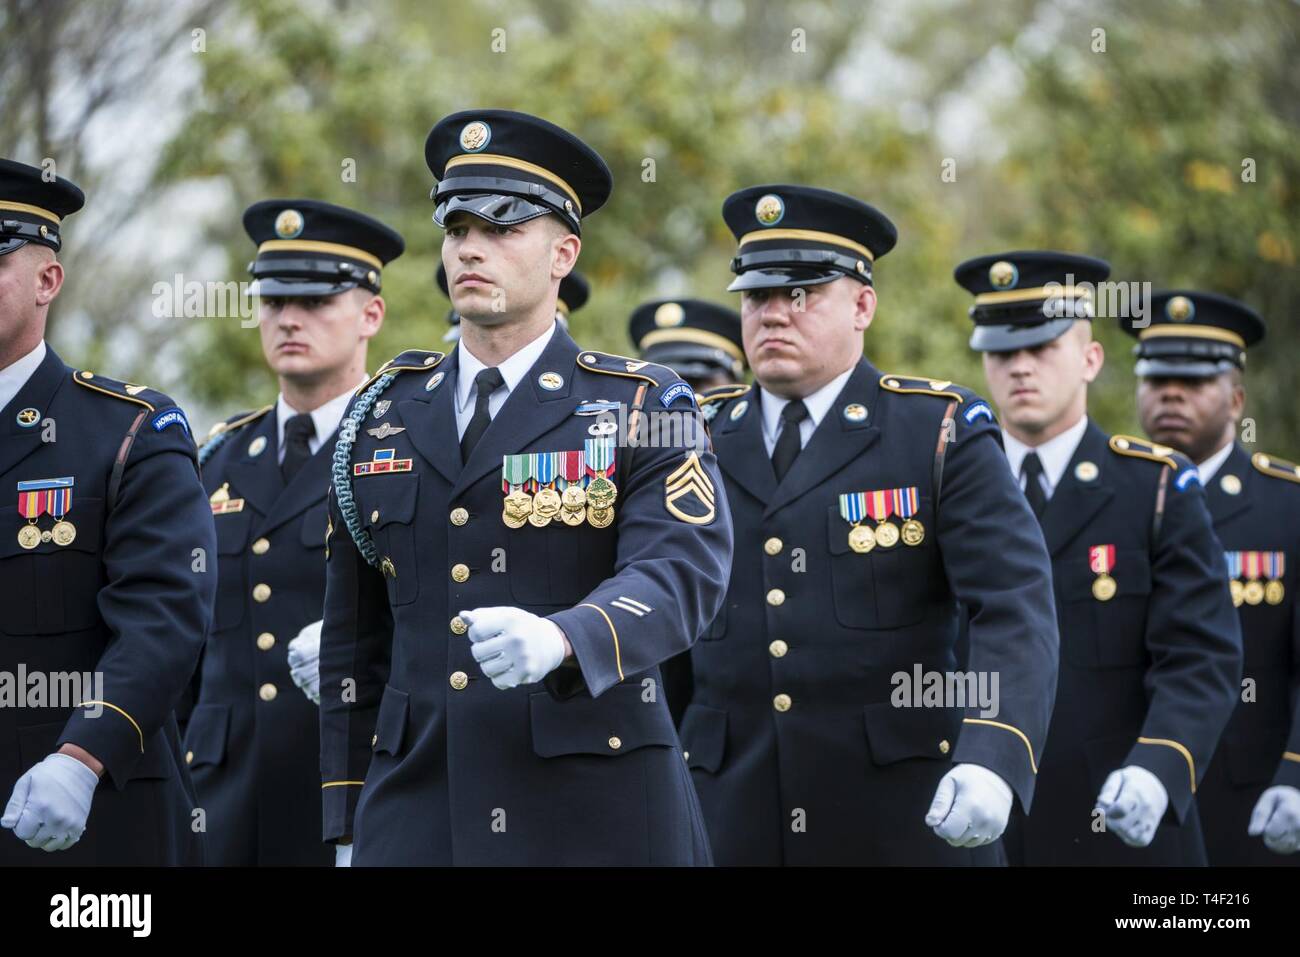 https://c8.alamy.com/comp/T4F216/soldiers-from-the-3d-us-infantry-regiment-the-old-guard-the-us-army-band-pershings-own-and-the-3d-us-infantry-regiment-the-old-guard-caisson-platoon-conduct-military-funeral-honors-with-funeral-escort-for-us-army-chief-warrant-officer-2-jonathan-farmer-in-section-60-of-arlington-national-cemetery-arlington-virginia-april-9-2019-farmer-joined-the-army-on-march-30-2005-and-graduated-in-2007-from-one-station-unit-training-at-fort-benning-georgia-to-become-a-special-forces-engineer-sergeant-he-earned-his-commission-as-a-special-forces-warrant-officer-in-2016-and-after-T4F216.jpg